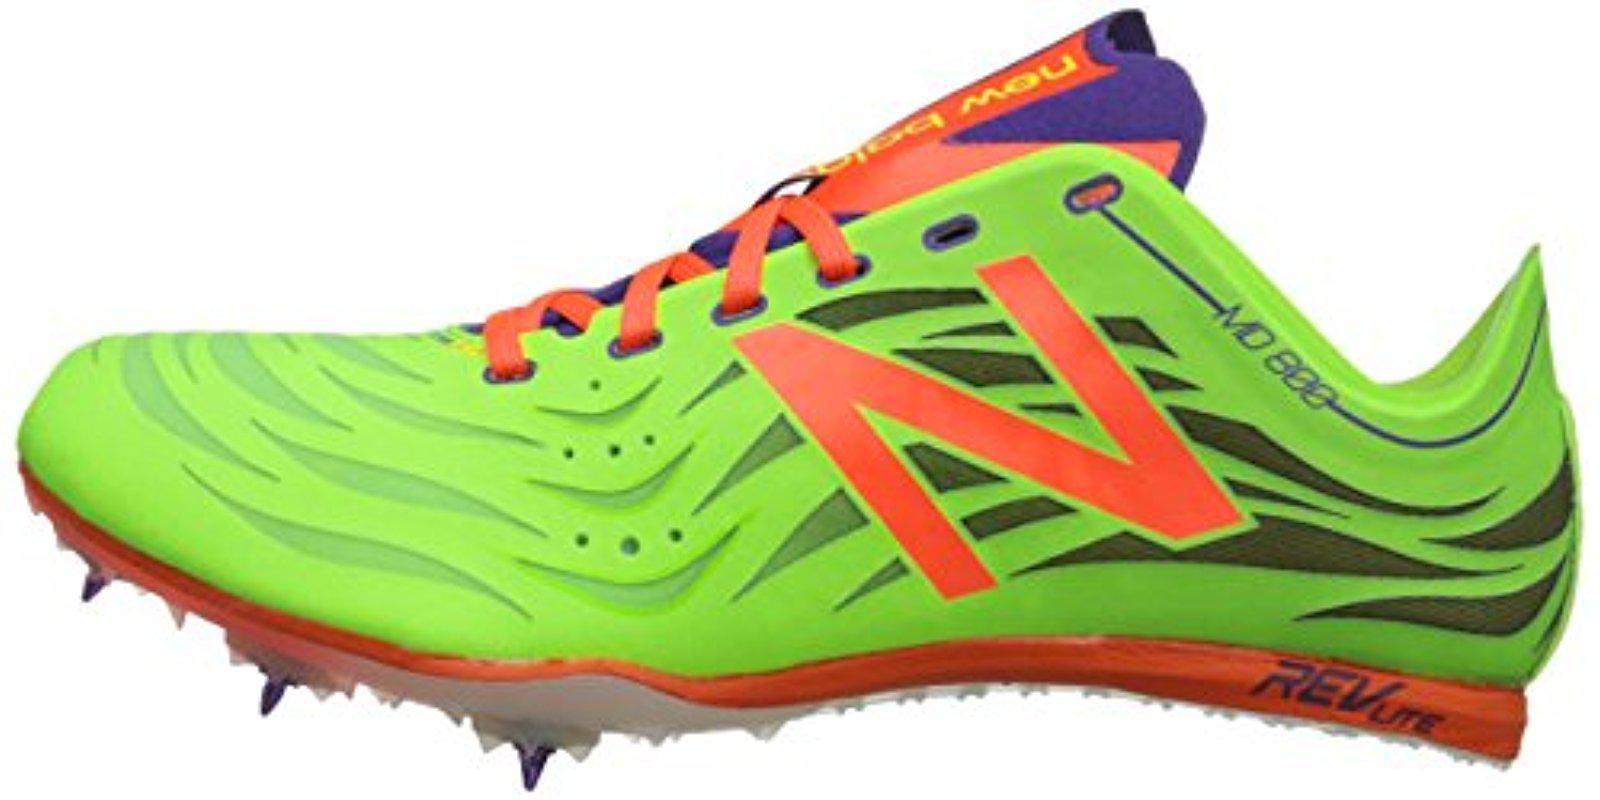 New Balance Lace Middle Distance 800 V4 Running Shoe in Lime/Orange (Green)  - Save 34% | Lyst